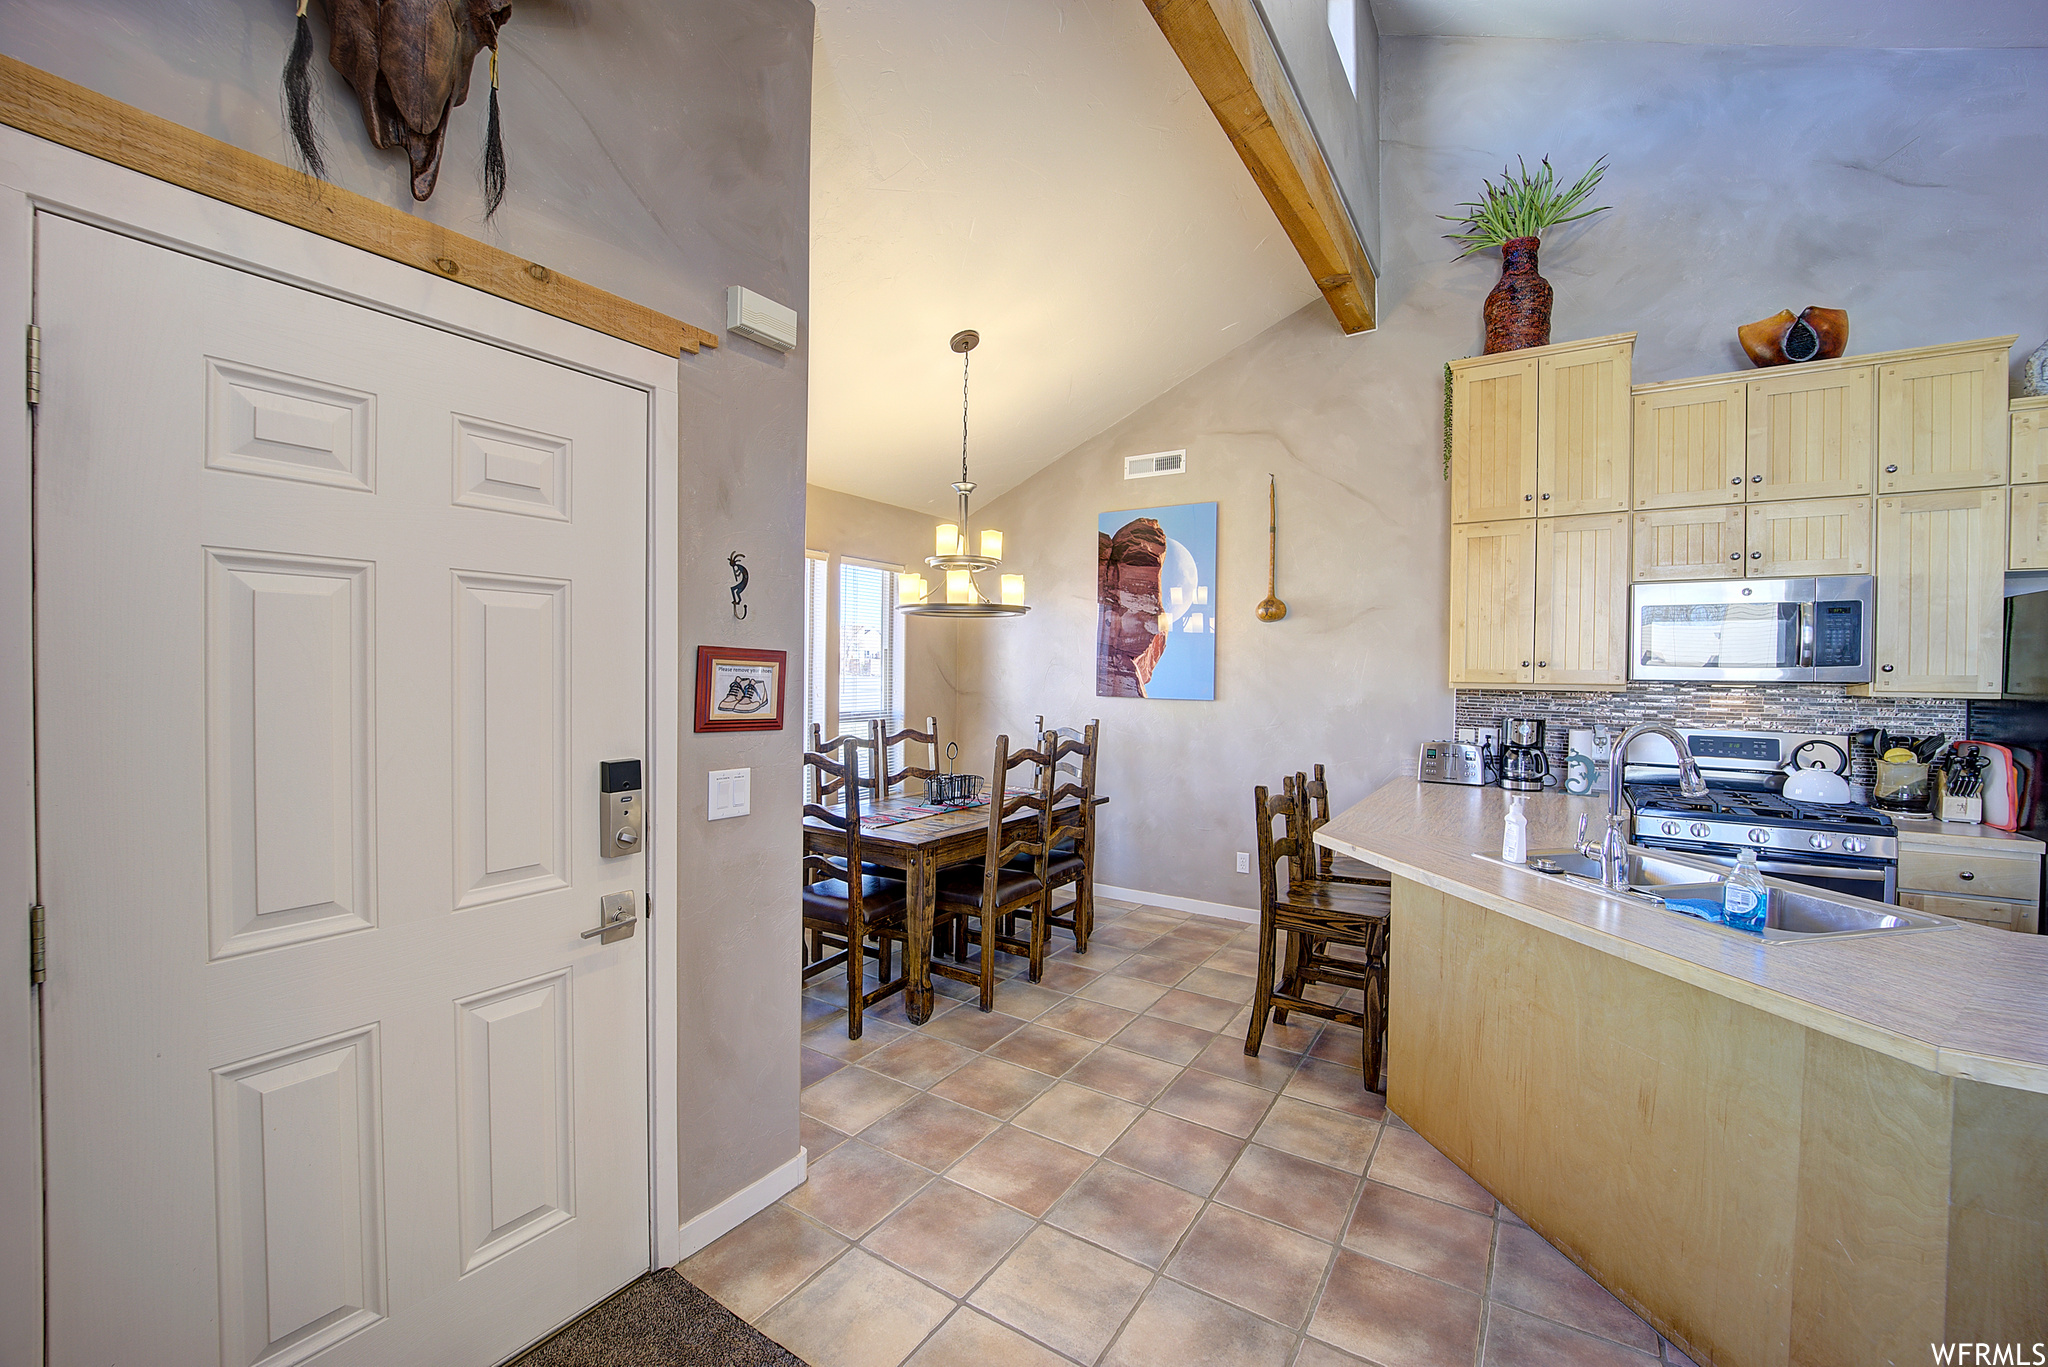 3686 S SPANISH VALLEY #C-1, Moab, Utah 84532, 3 Bedrooms Bedrooms, 12 Rooms Rooms,2 BathroomsBathrooms,Residential,For sale,SPANISH VALLEY,1864045